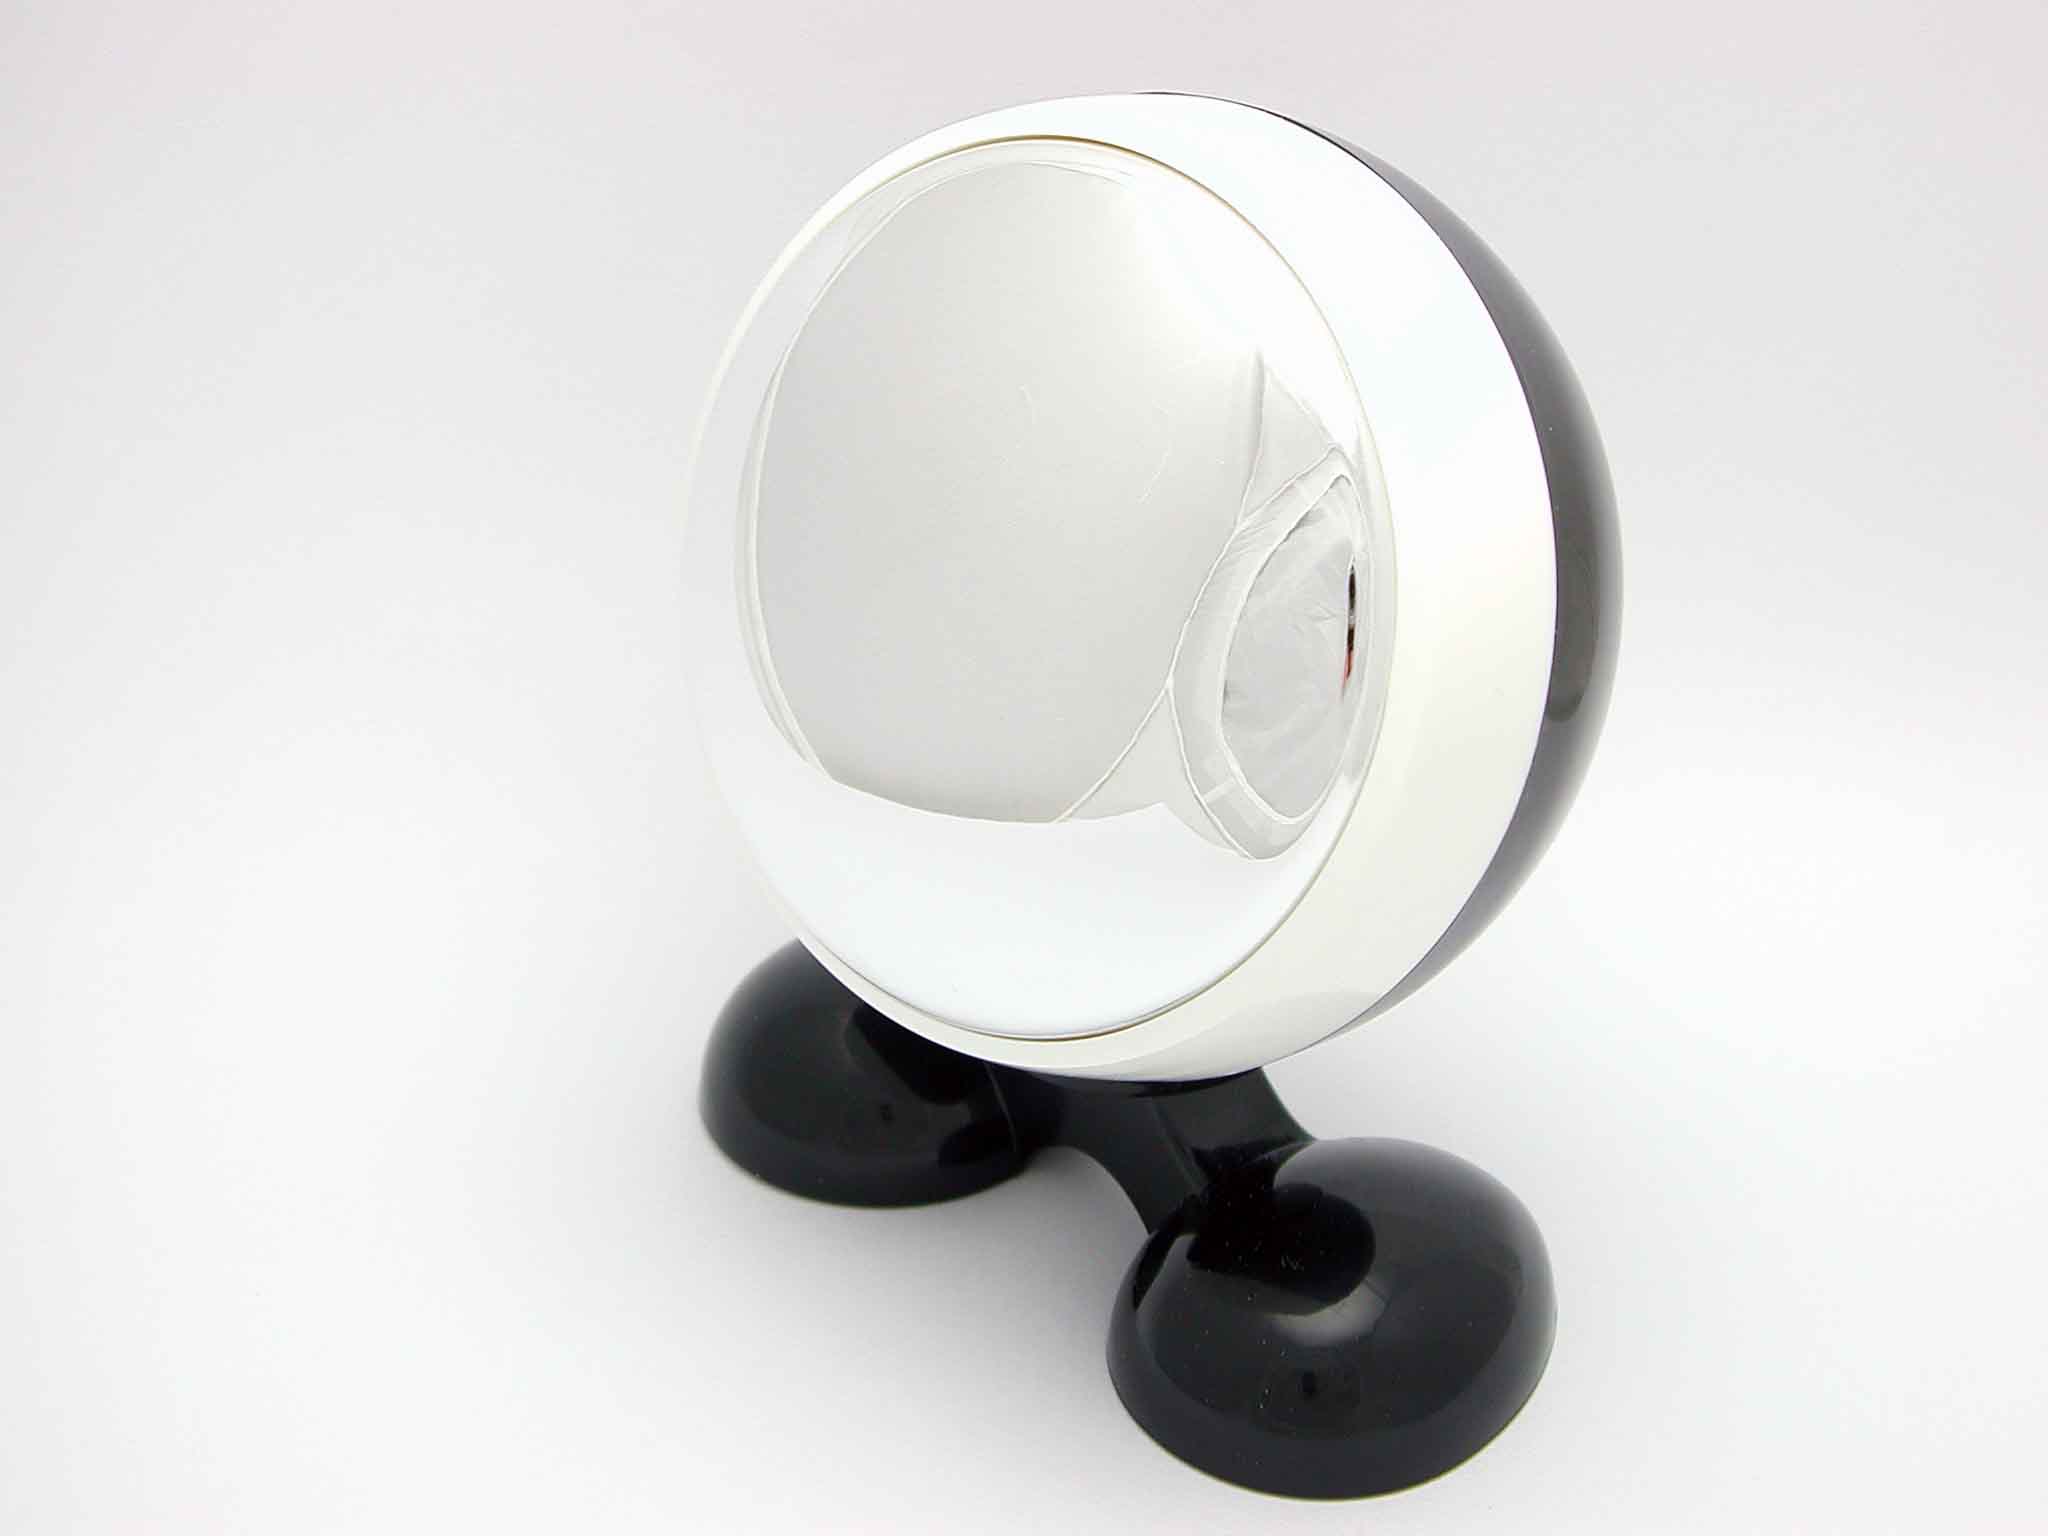  Our Item-Ball Shape Mirror With Stand ( Our Item-Ball Shape Mirror With Stand)